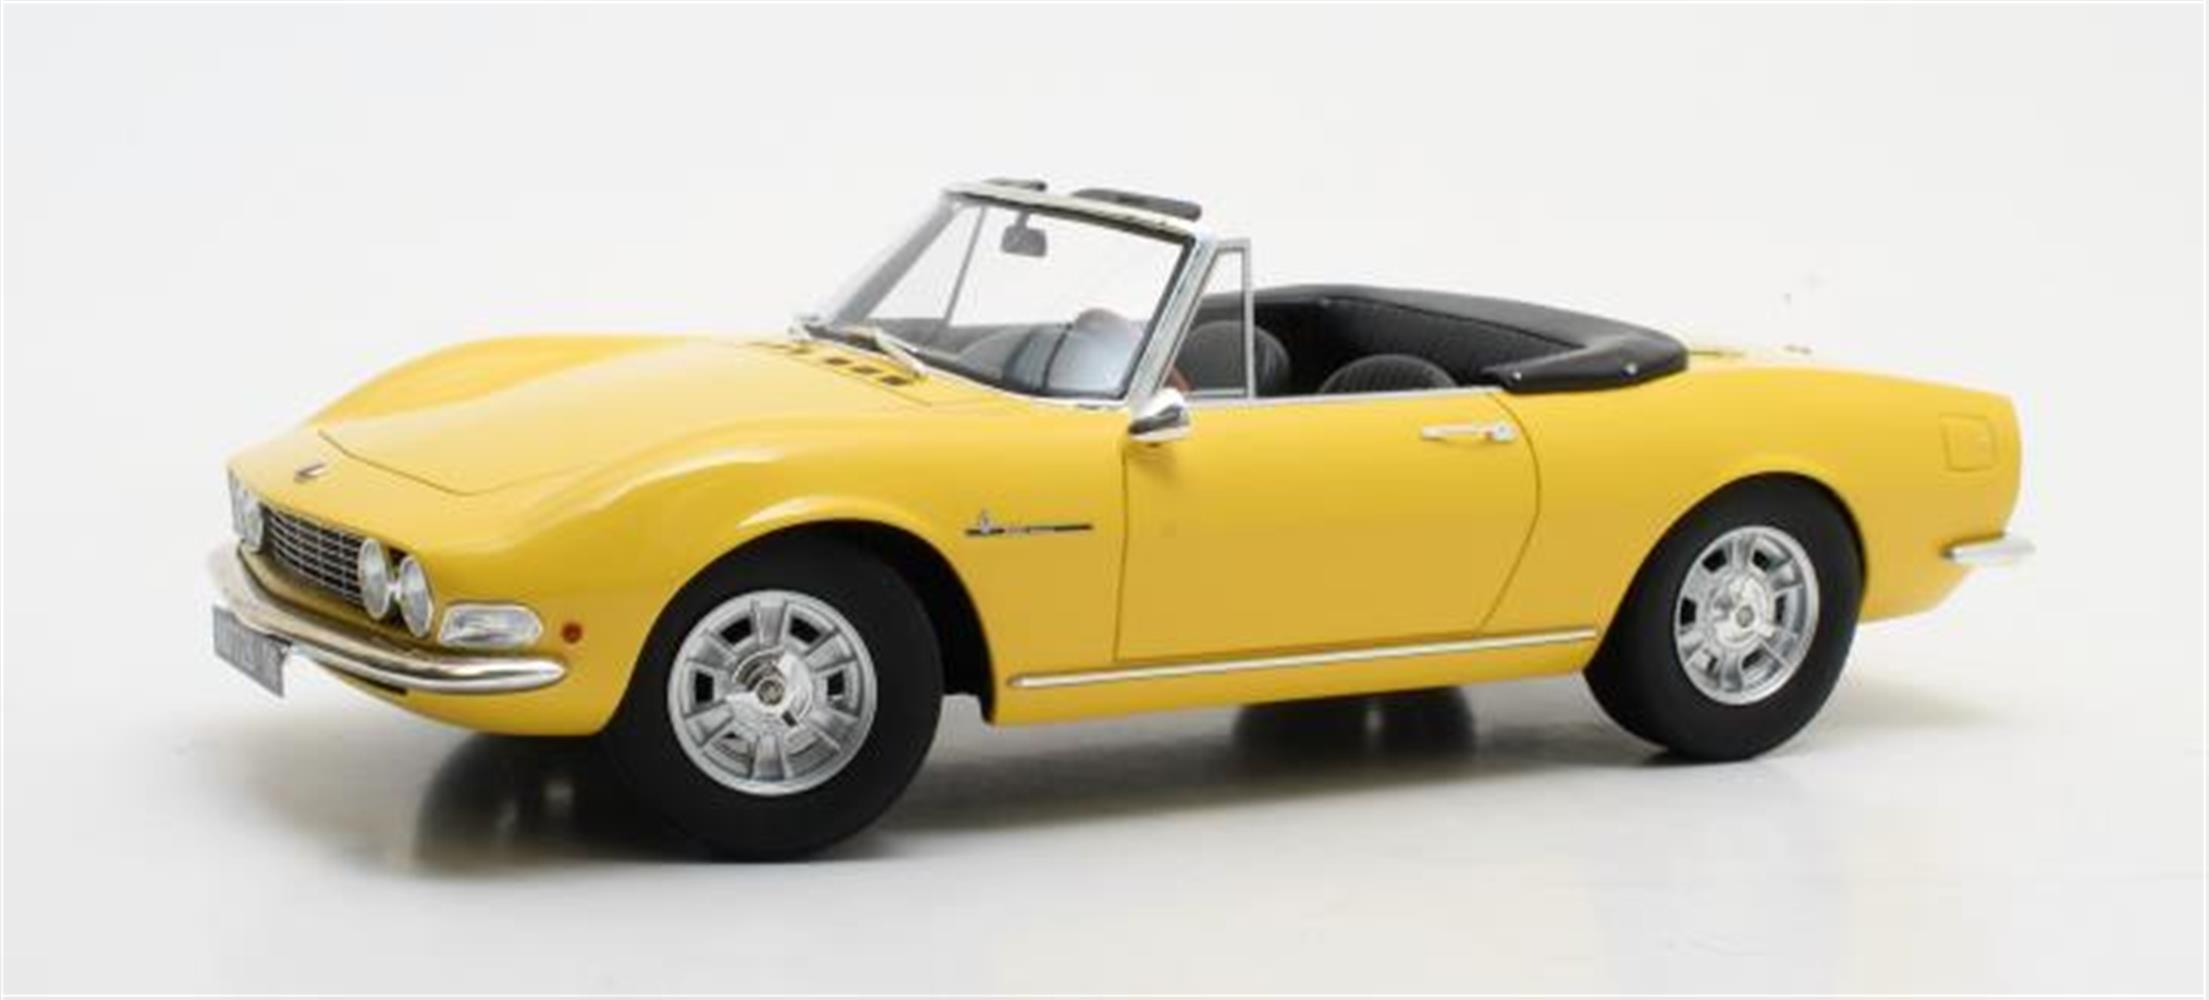 Fiat Dino Spyder yellow 1966 1:18 Cult Scale Models